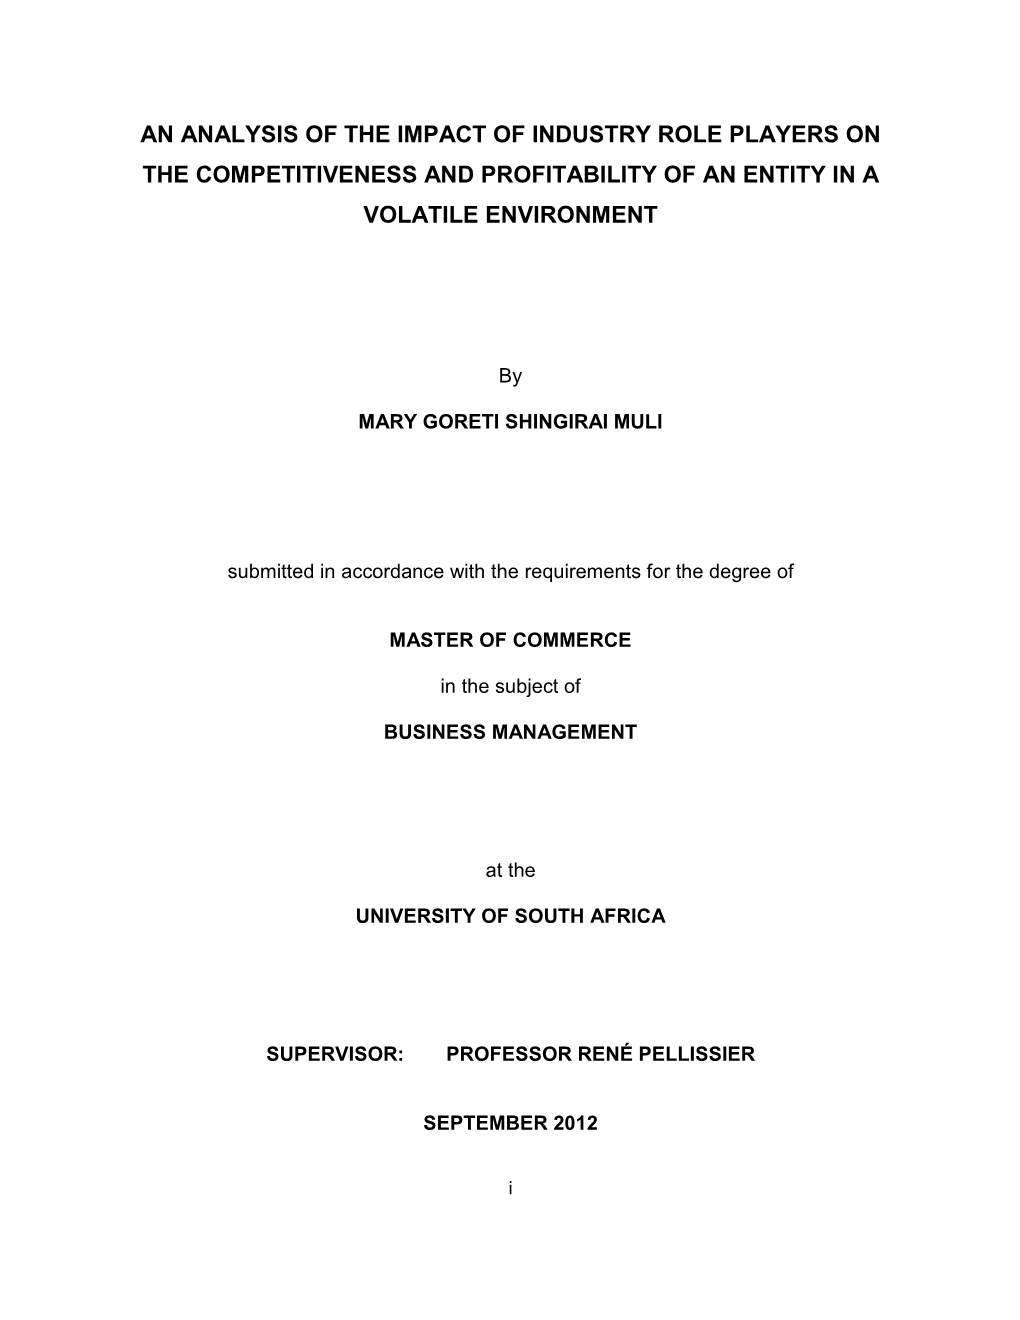 An Analysis of the Impact of Industry Role Players on the Competitiveness and Profitability of an Entity in a Volatile Environment